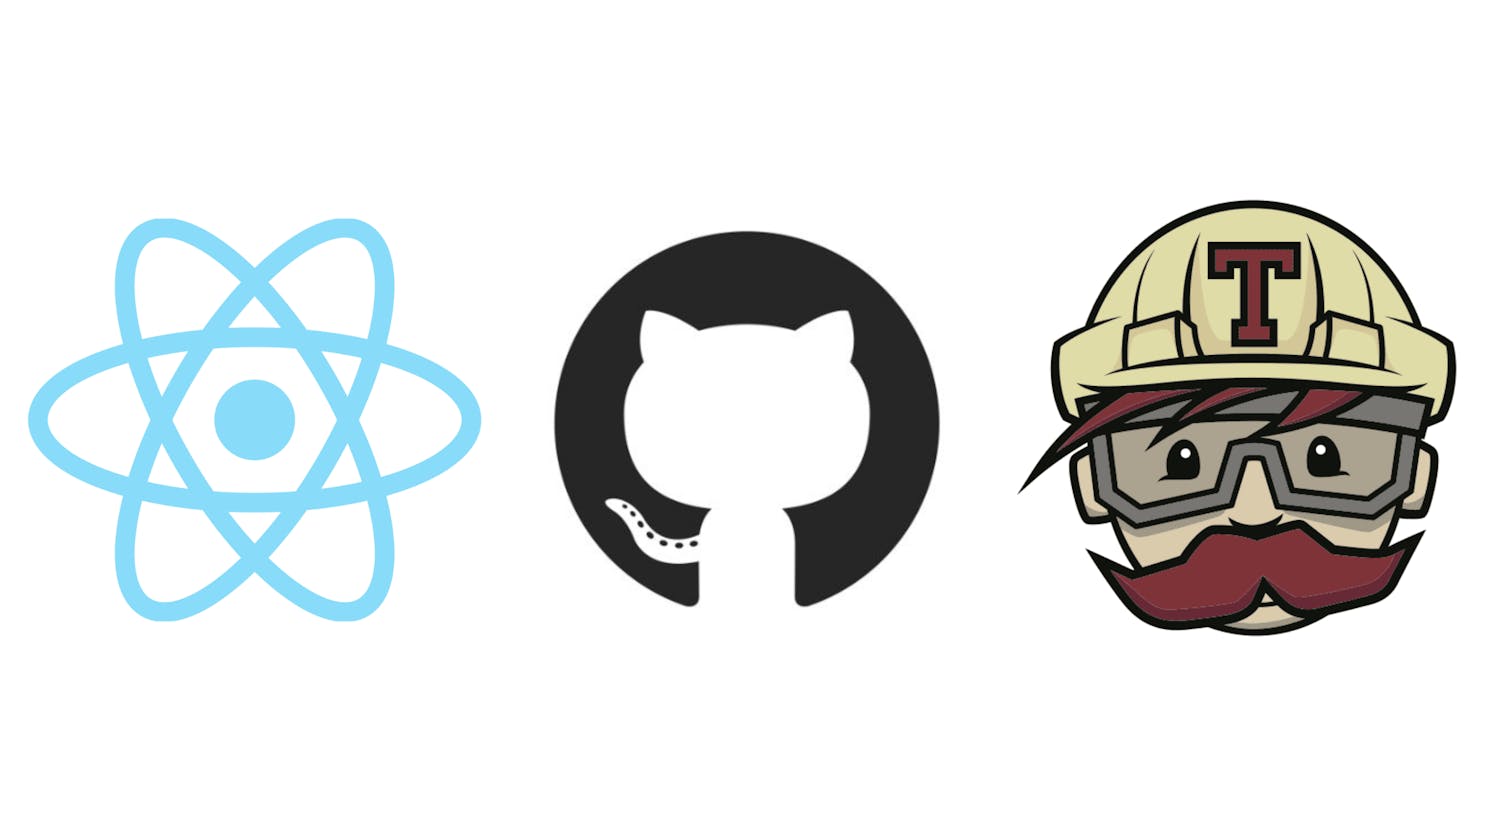 Setting up CI/CD Pipeline for a React app using Travis CI